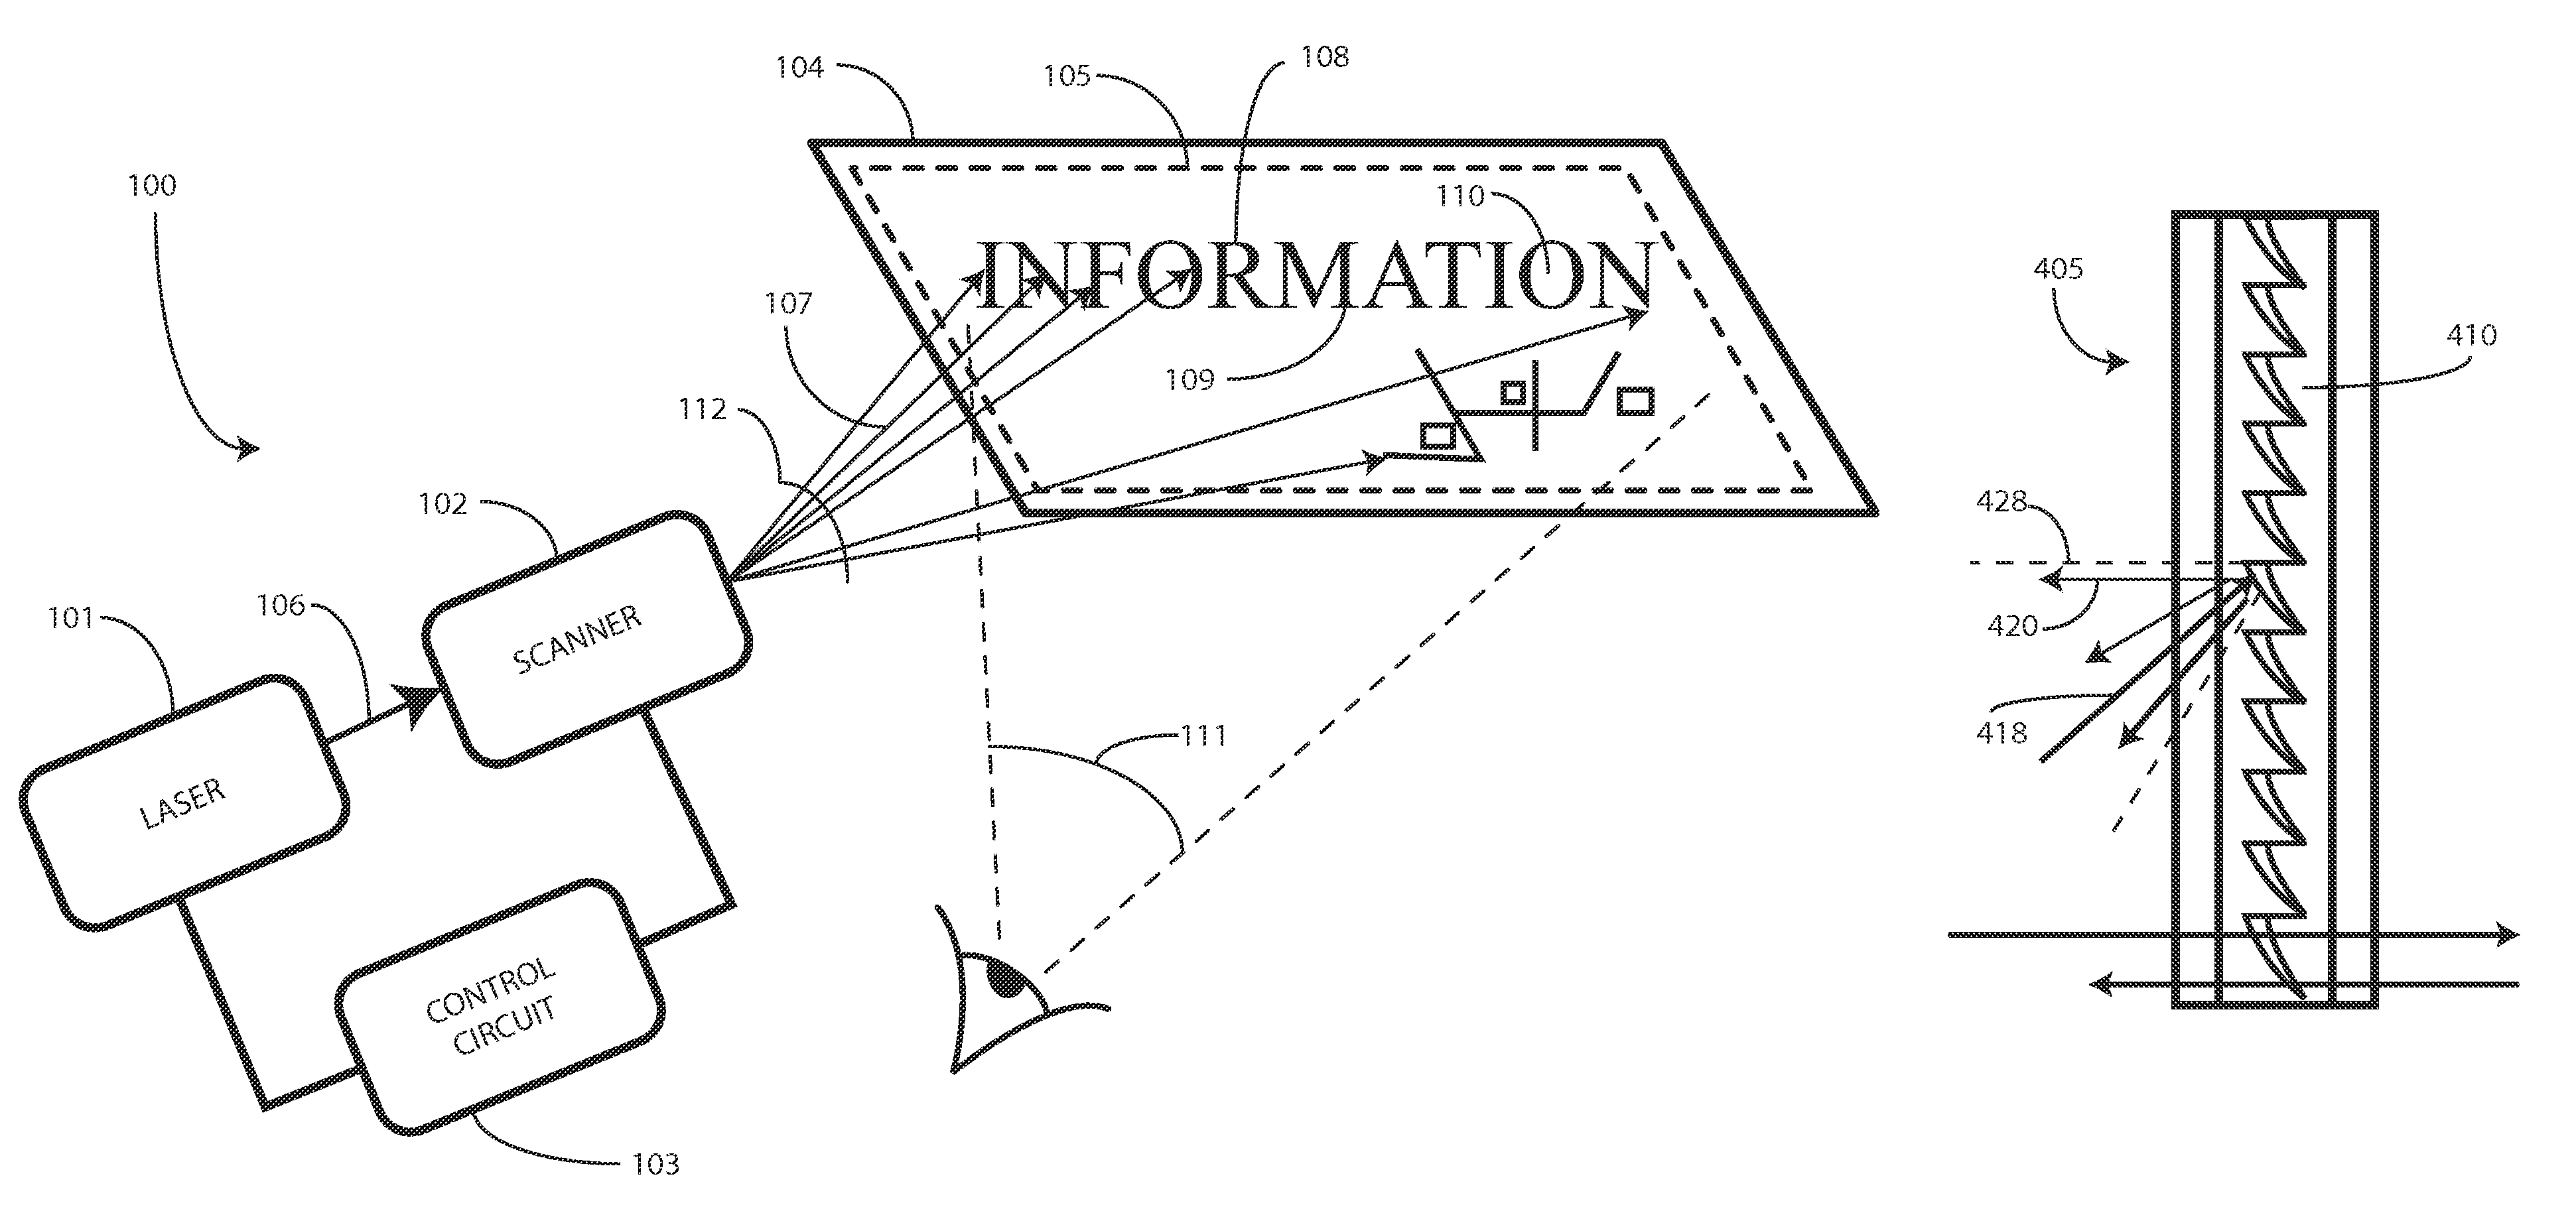 Wide field of view head-up display system